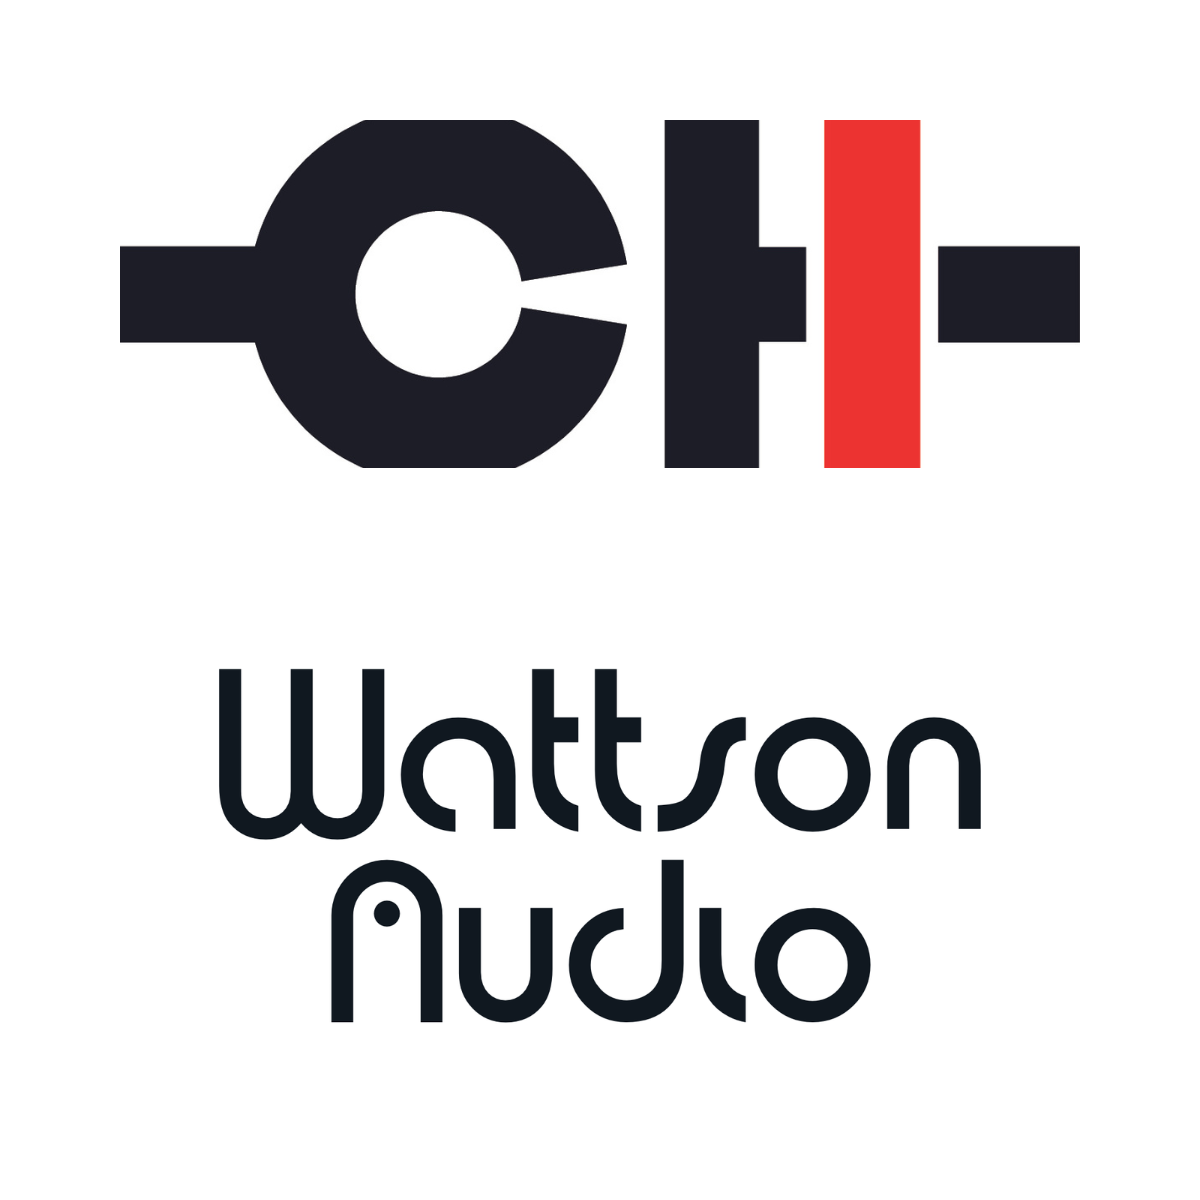 ch and wattson logos